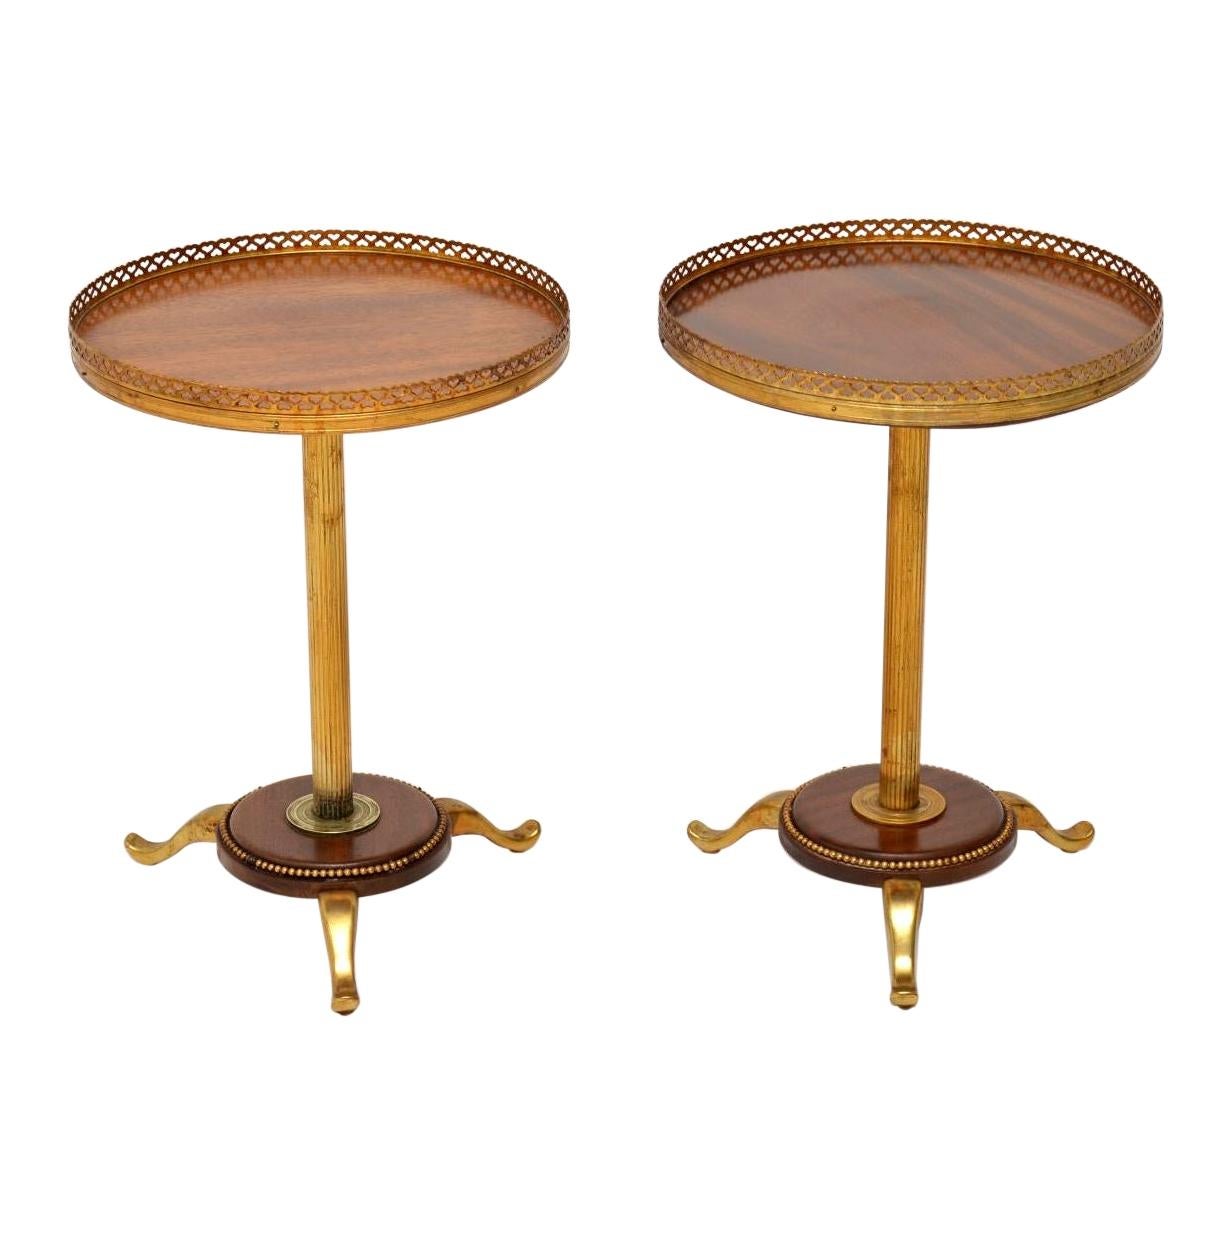 Pair of Antique Mahogany and Brass Wine Tables